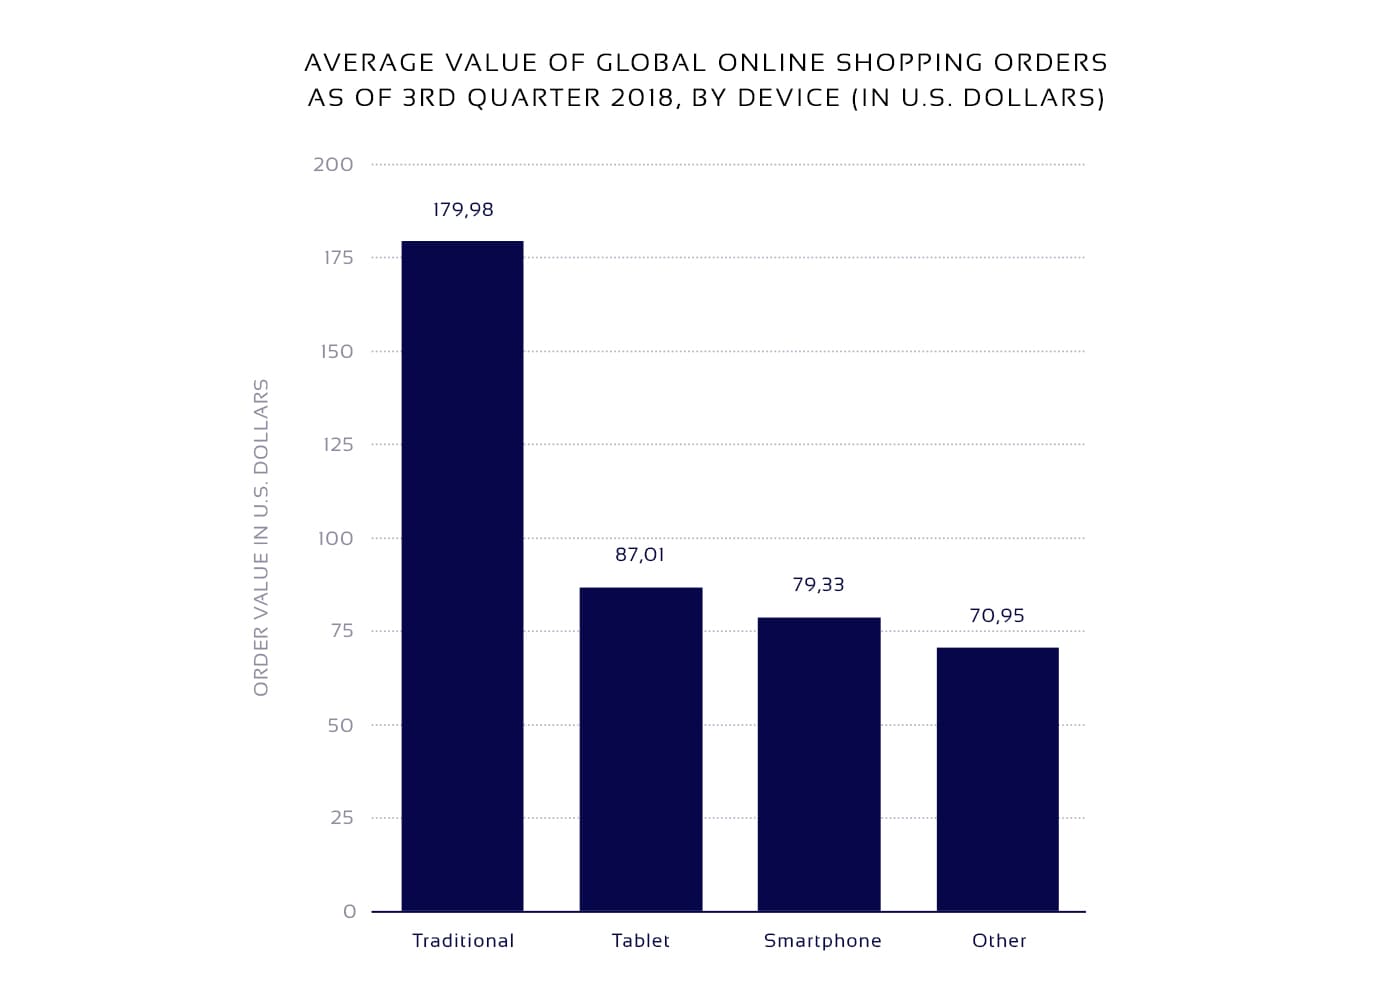 Average P2P marketplace online shopping value in 2018